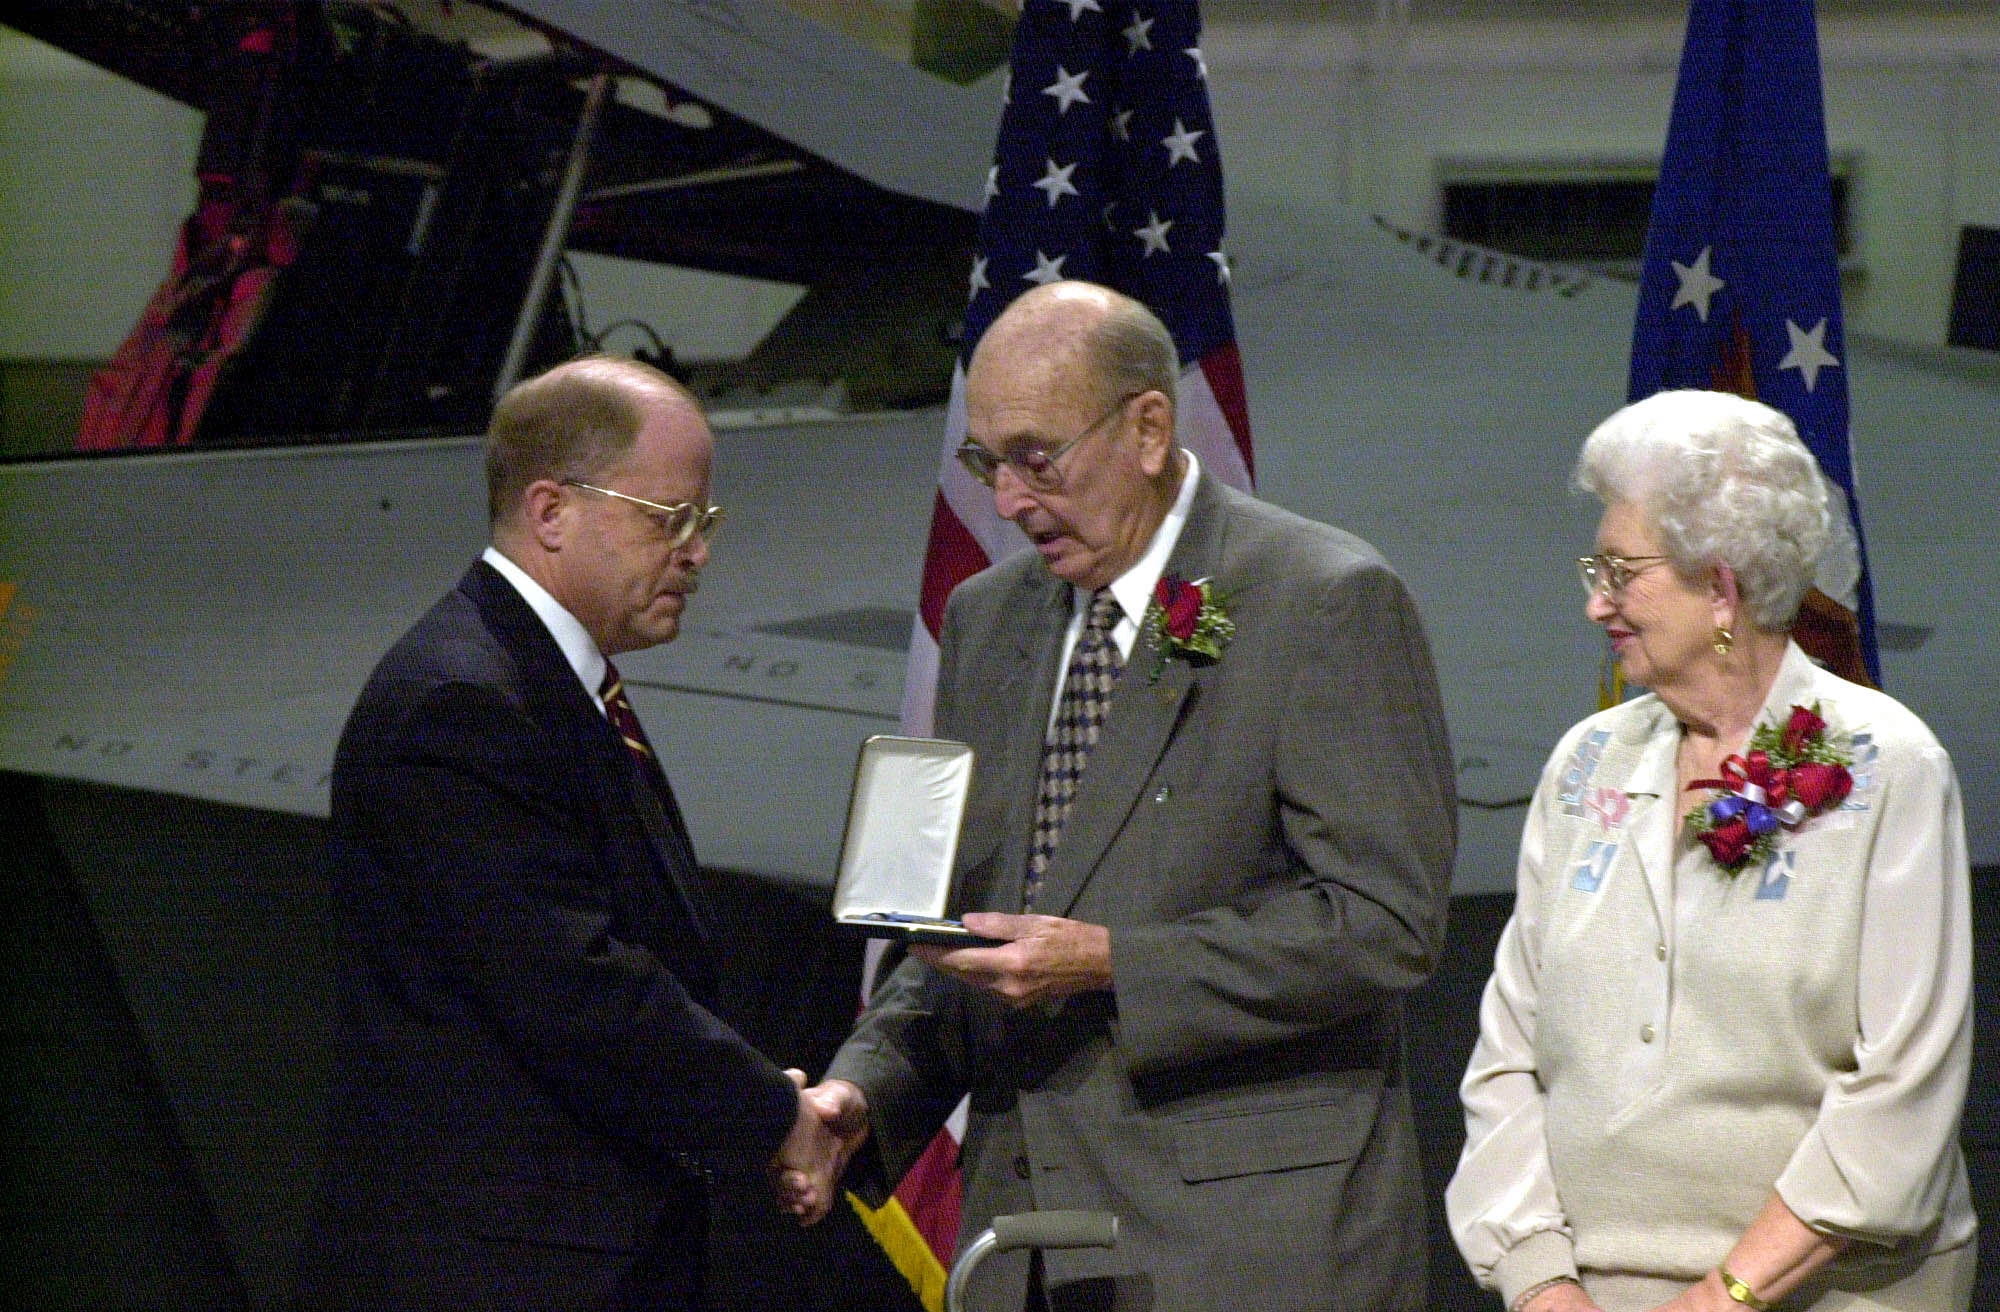 WRIGHT-PATTERSON AIR FORCE BASE, Ohio -- Alice Pitsenbarger (right) observes as her husband, William F. Pitsenbarger (center), accepts the Medal of Honor on his son's behalf from Secretary of the Air Force Whit Peters during a ceremony Dec. 8, here. (U.S Air Force photo by Tech. Sgt. Gary Coppage)